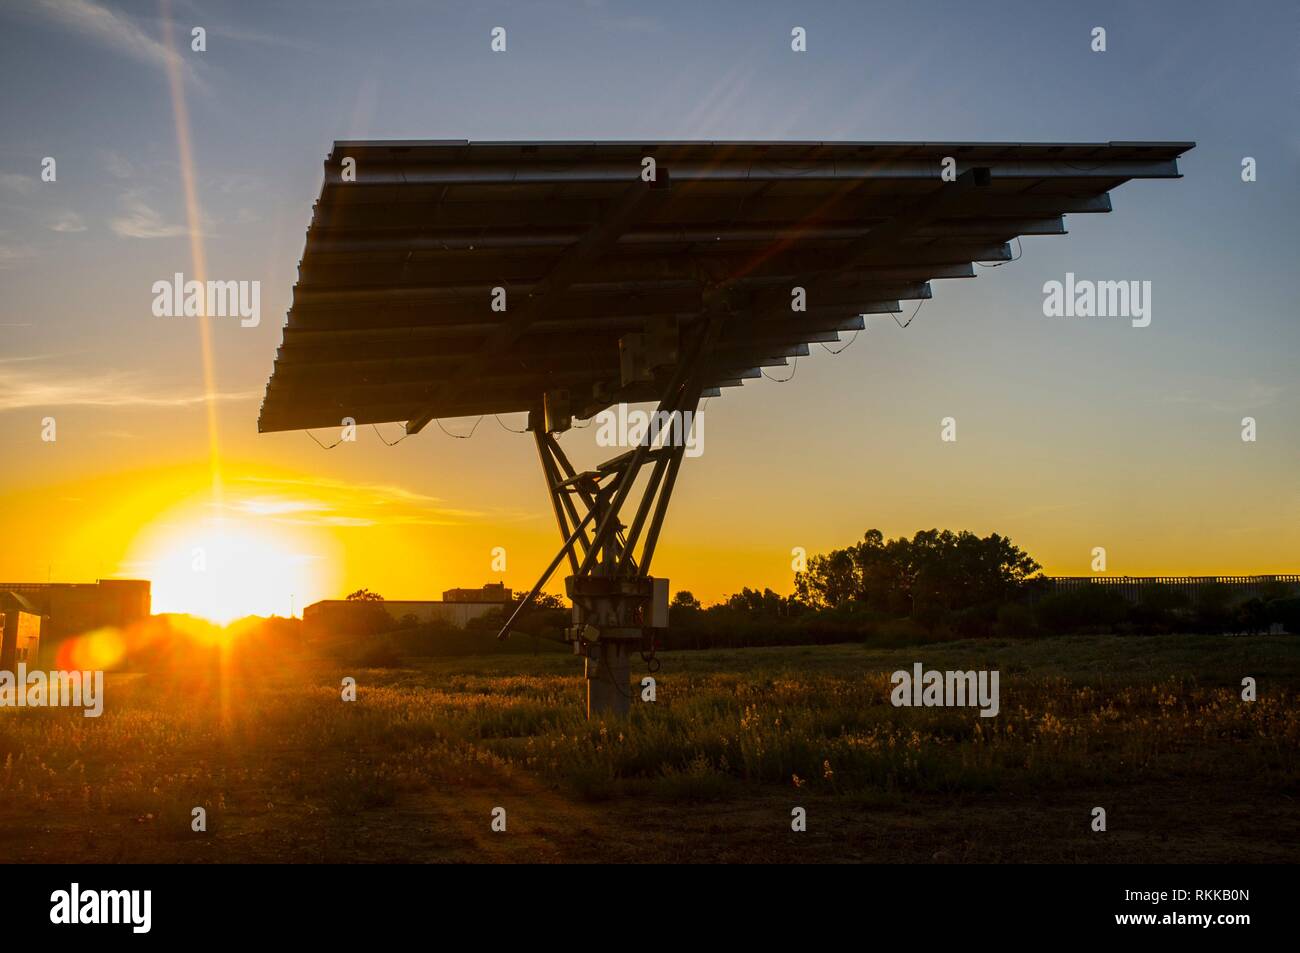 Urban photovoltaic panel with solar tracker placed outdoors building. Stock Photo